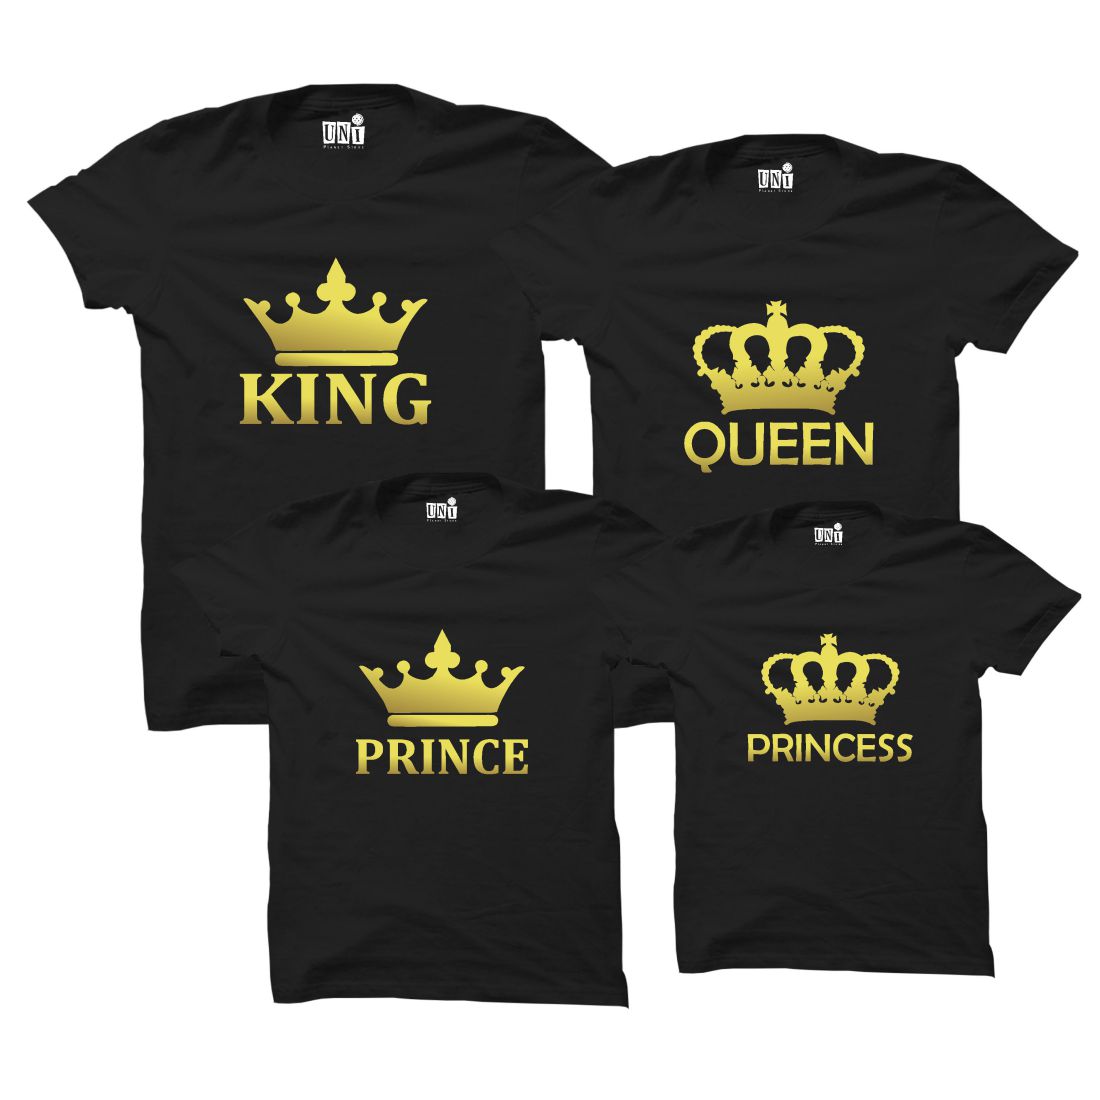 KING QUEEN FAMILY T-SHIRTS - Family King Queen Prince Princess